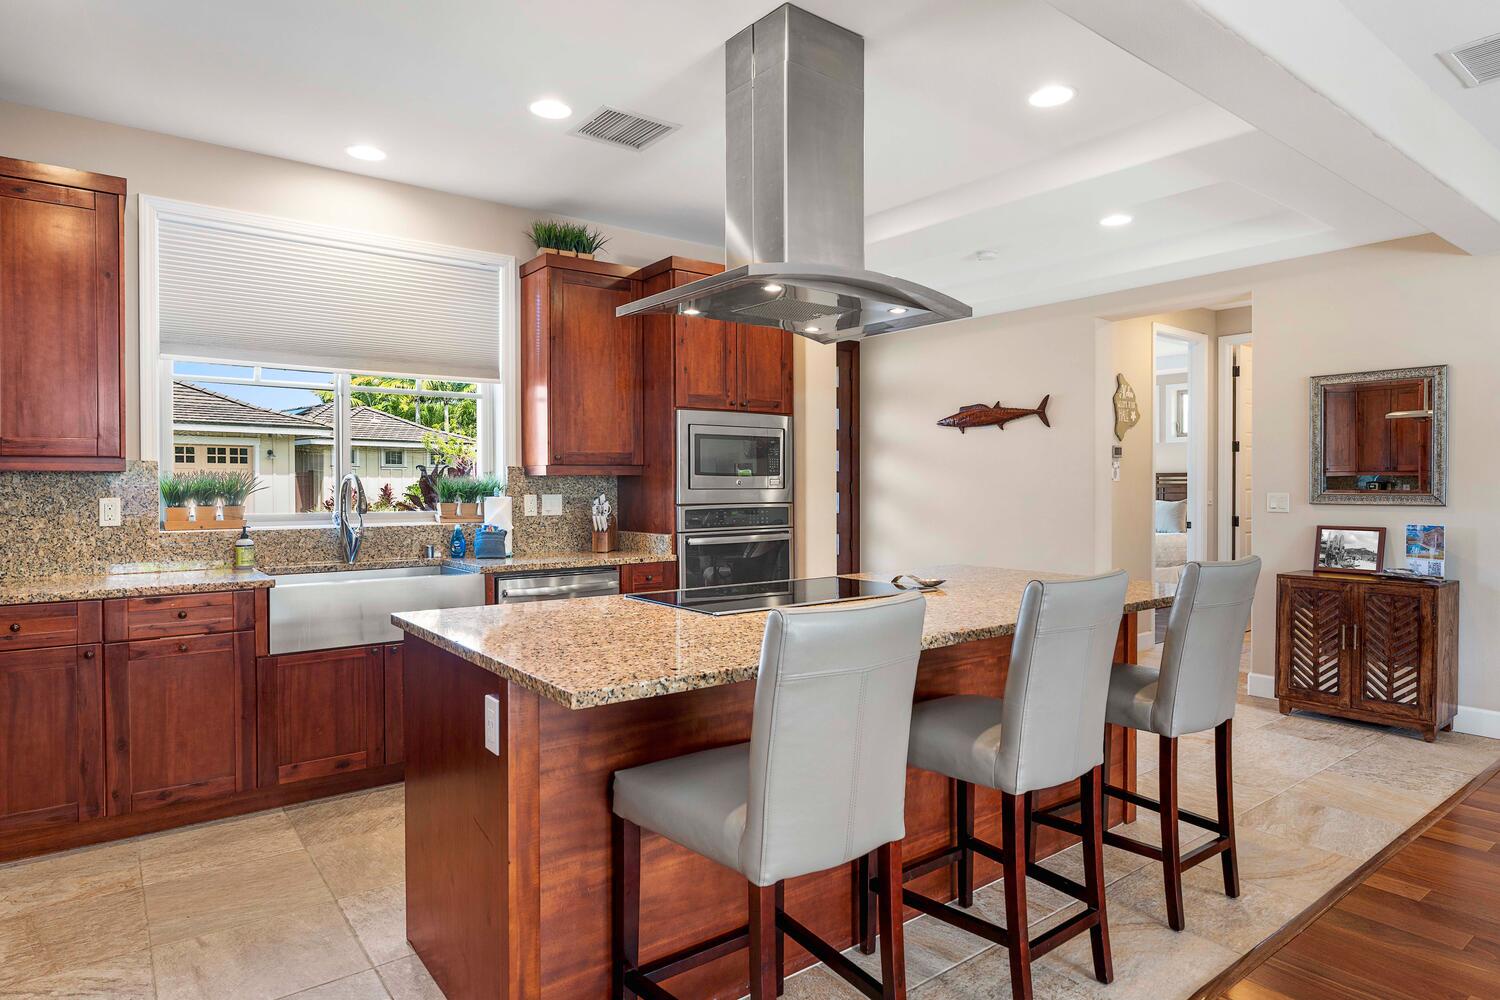 Kailua Kona Vacation Rentals, Holua Kai #32 - A gorgeous gourmet kitchen with fine finishes such as granite counter tops and solid wood cabinets flows into an expansive great room.